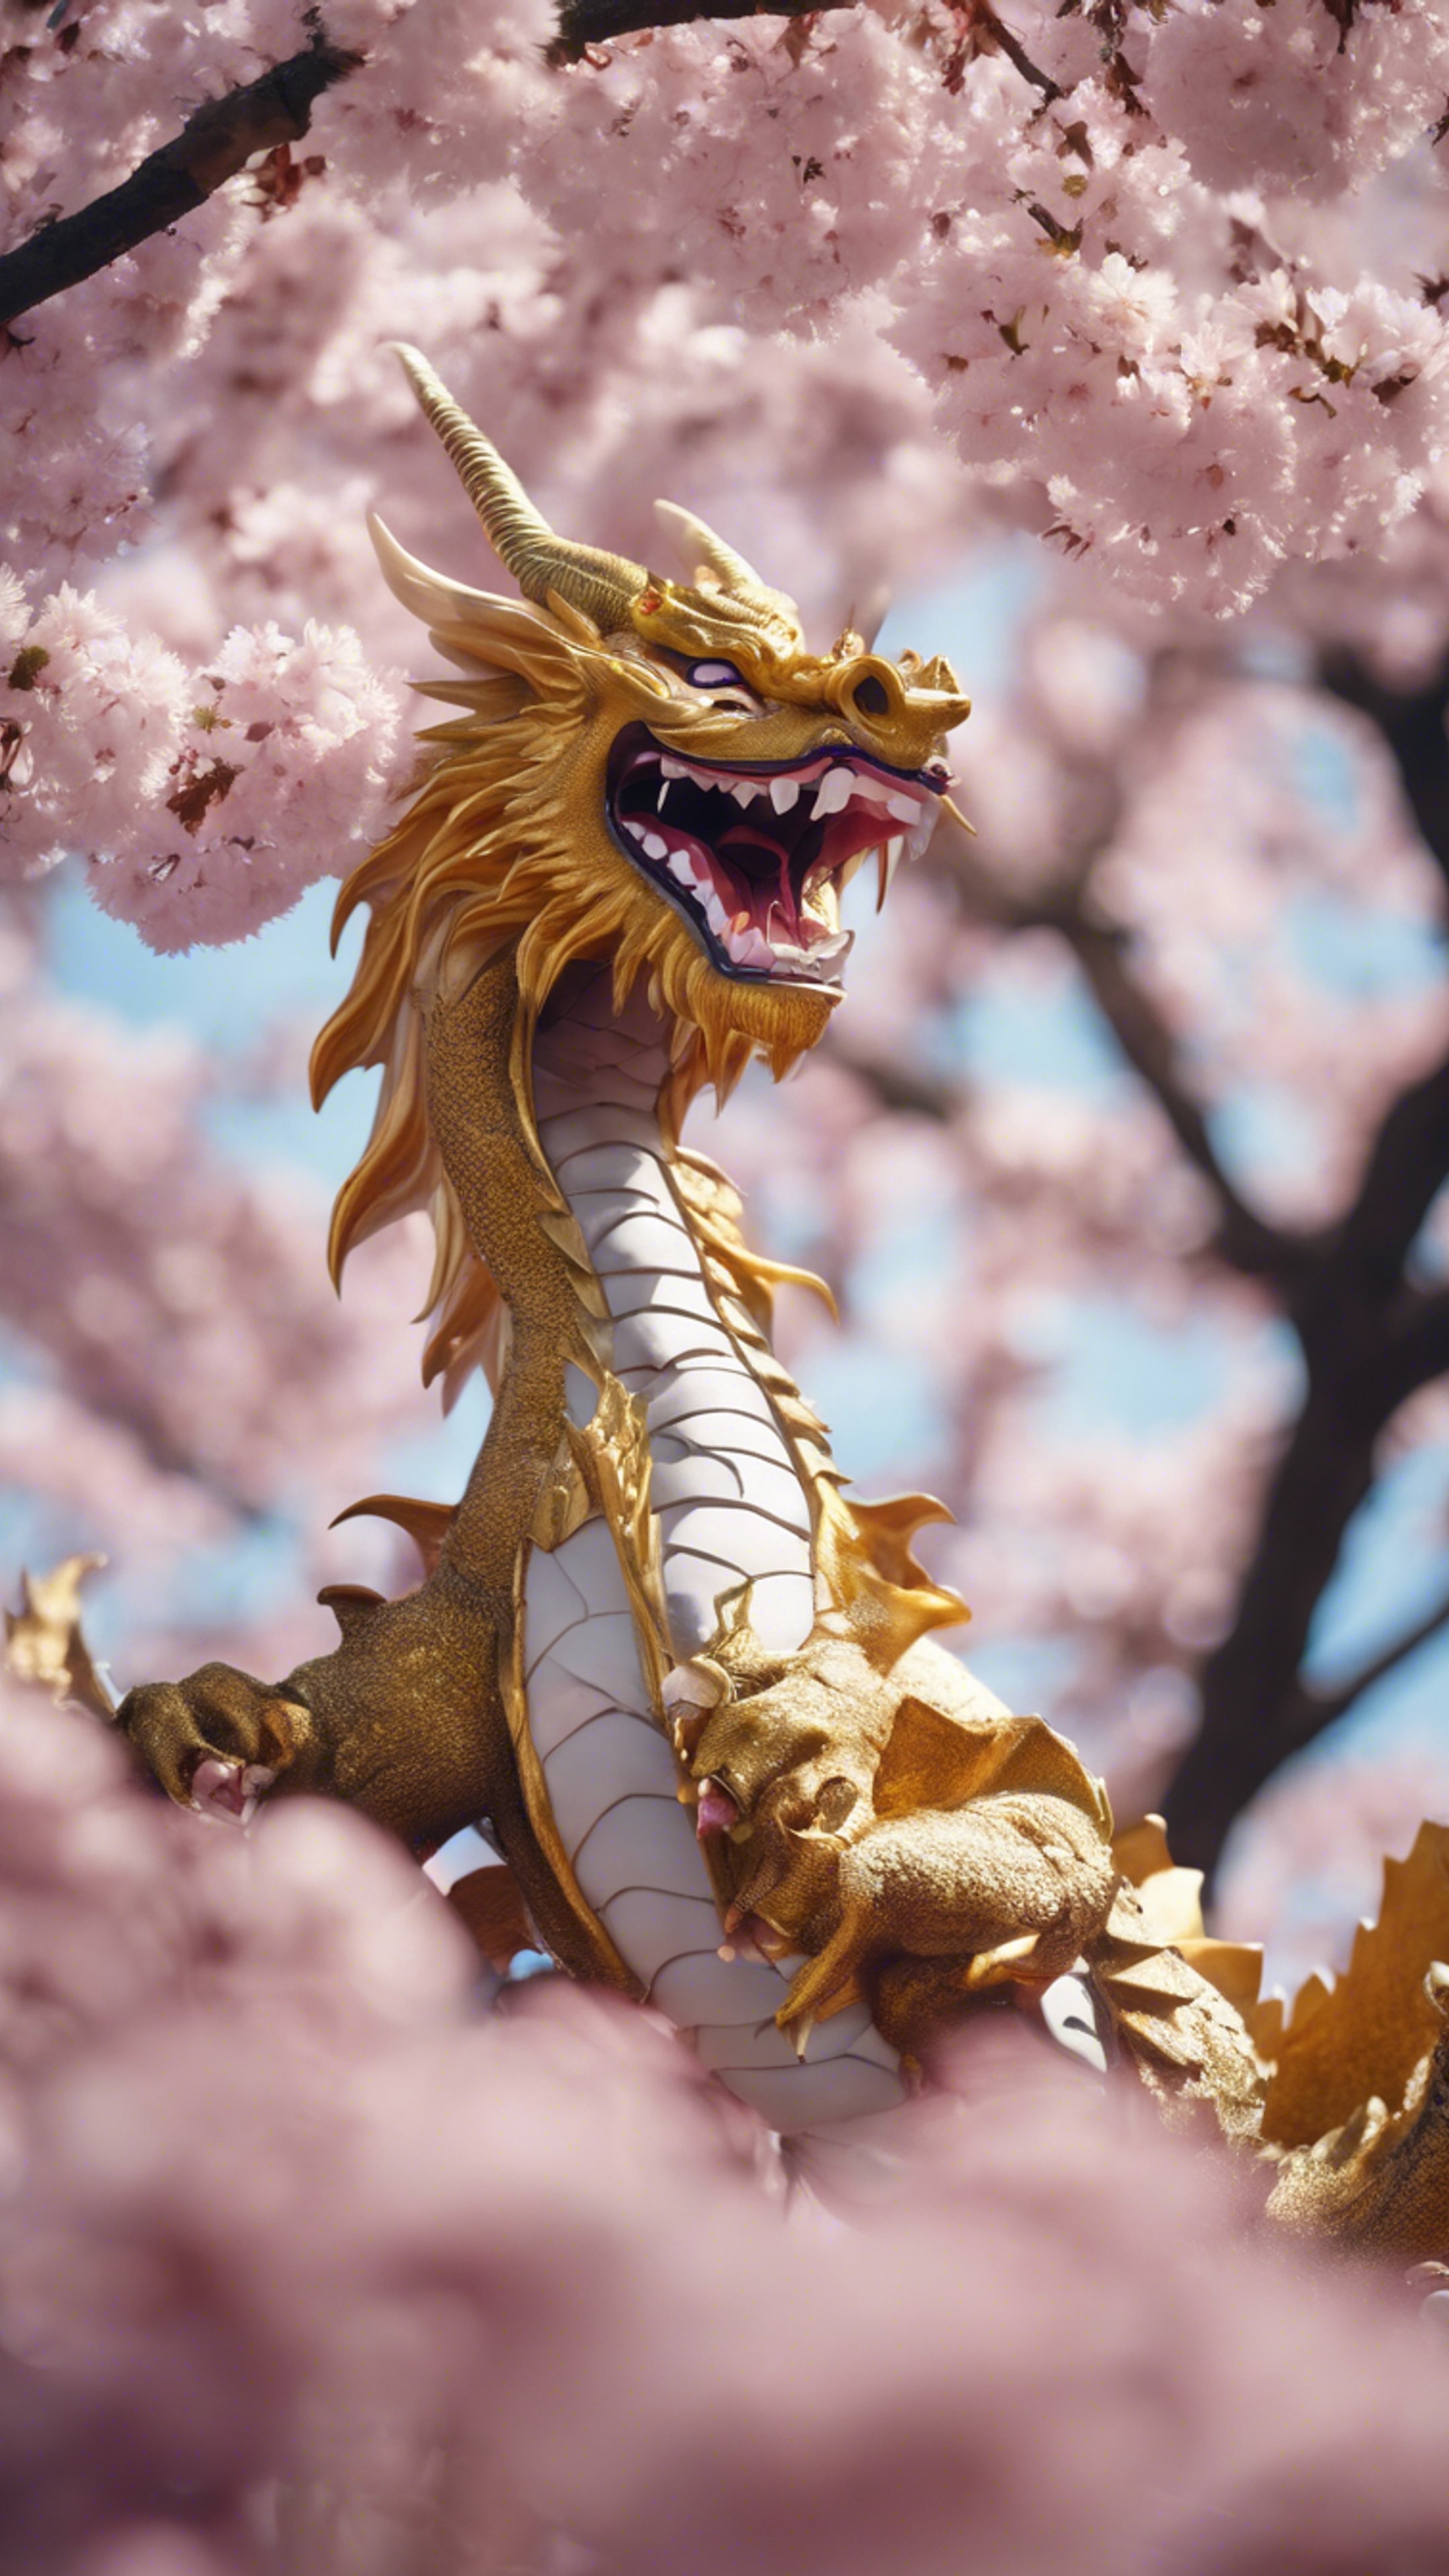 A playful Japanese dragon frolicking in the cherry blossom festival. 墙纸[dfac1438ceb04769bc5b]